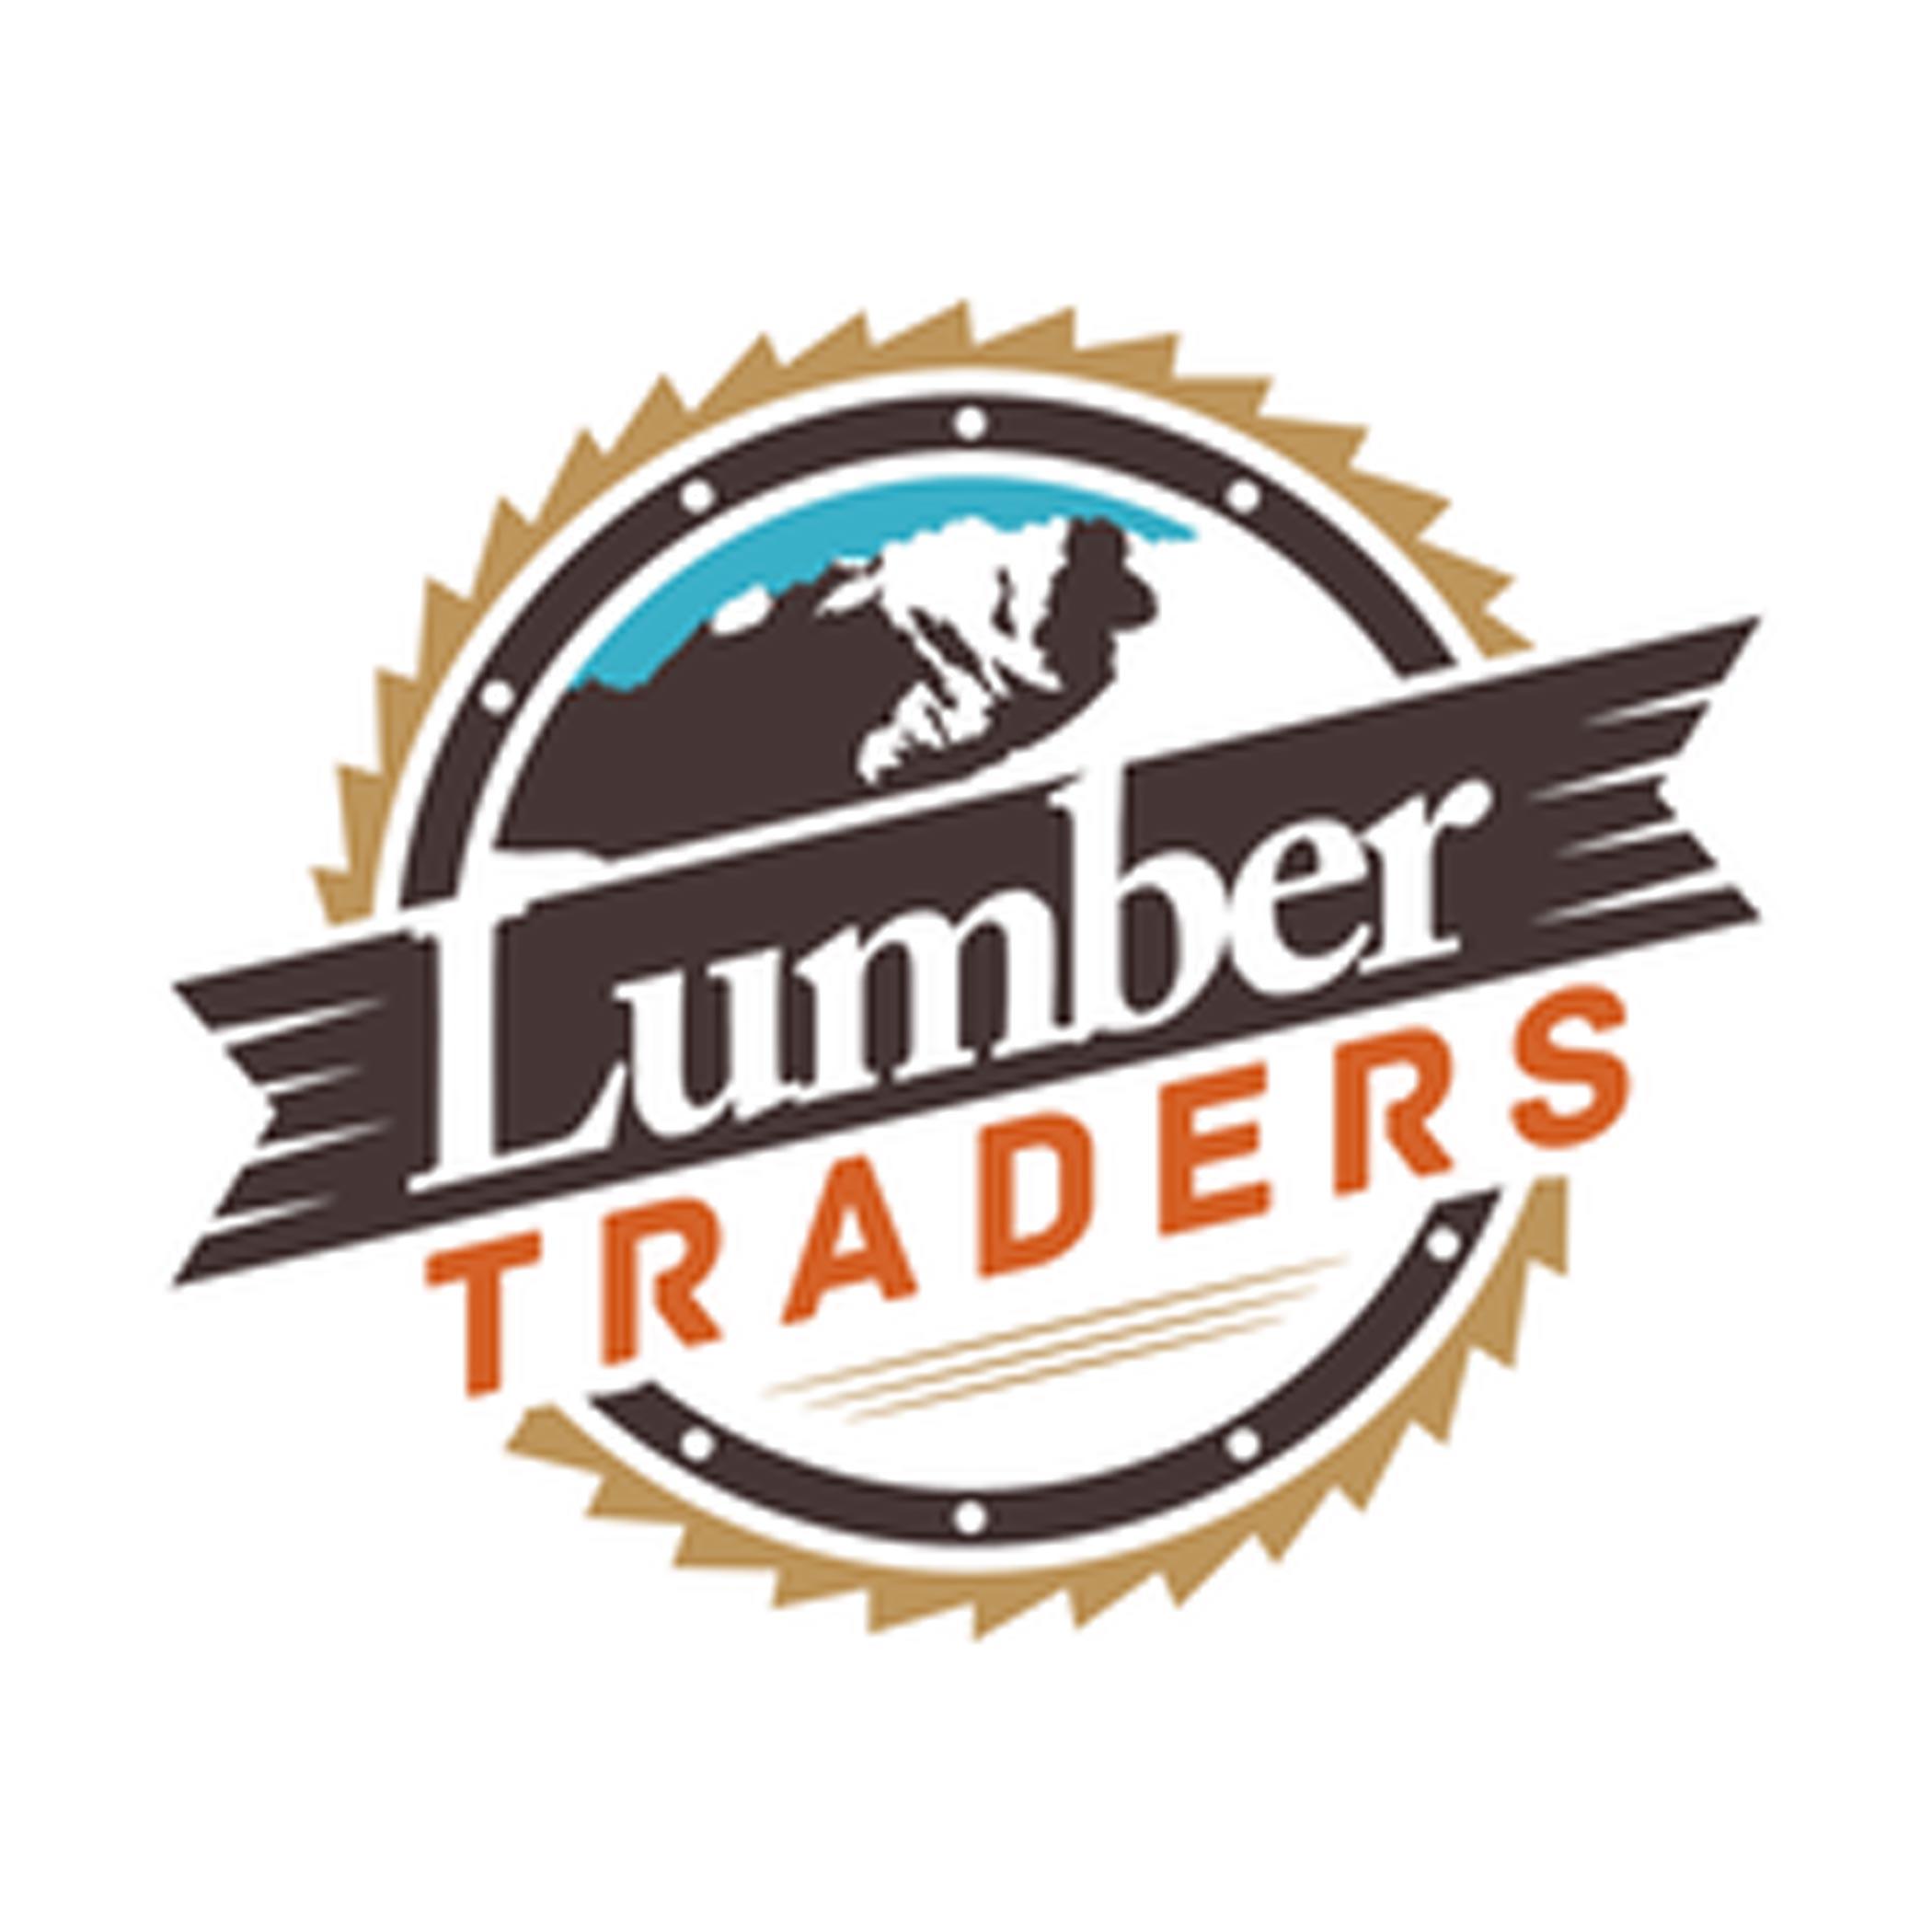 Traders Logo - Lumber-Traders-Logo ~ Team Training - The Yes Works